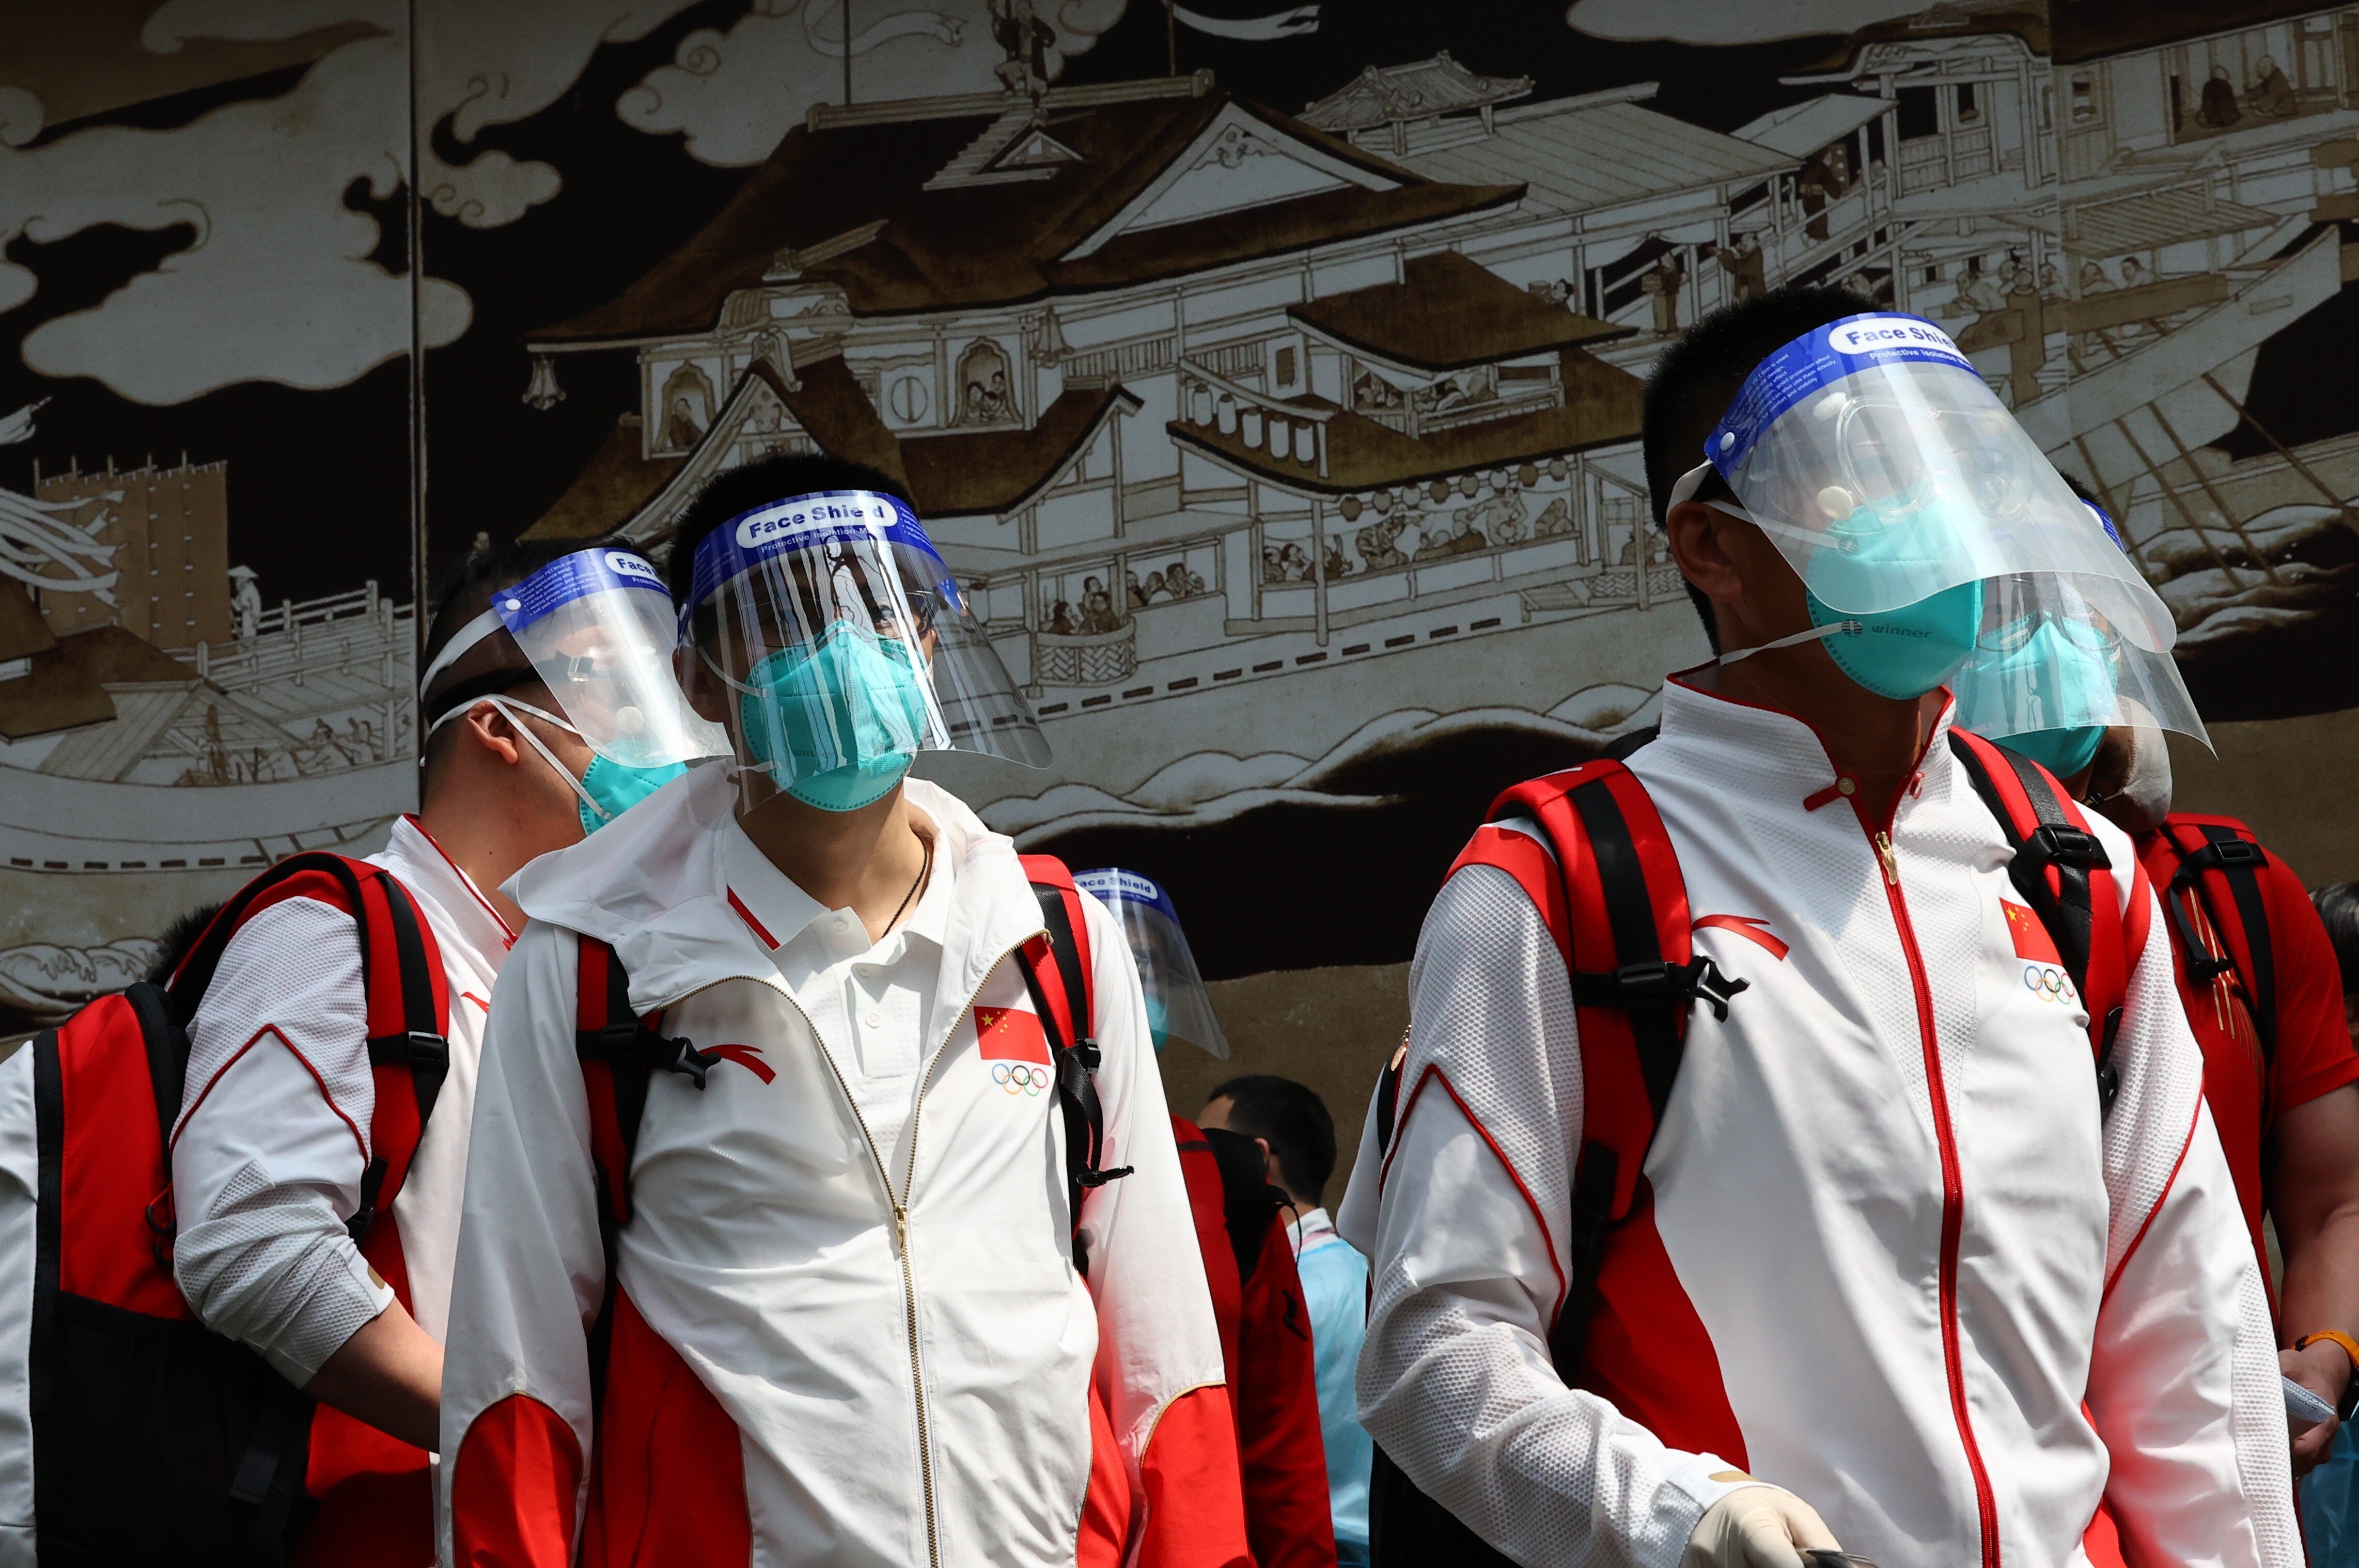 Chinese athletes wearing protective face masks arrive in Tokyo before the Olympics. Photo: Reuters